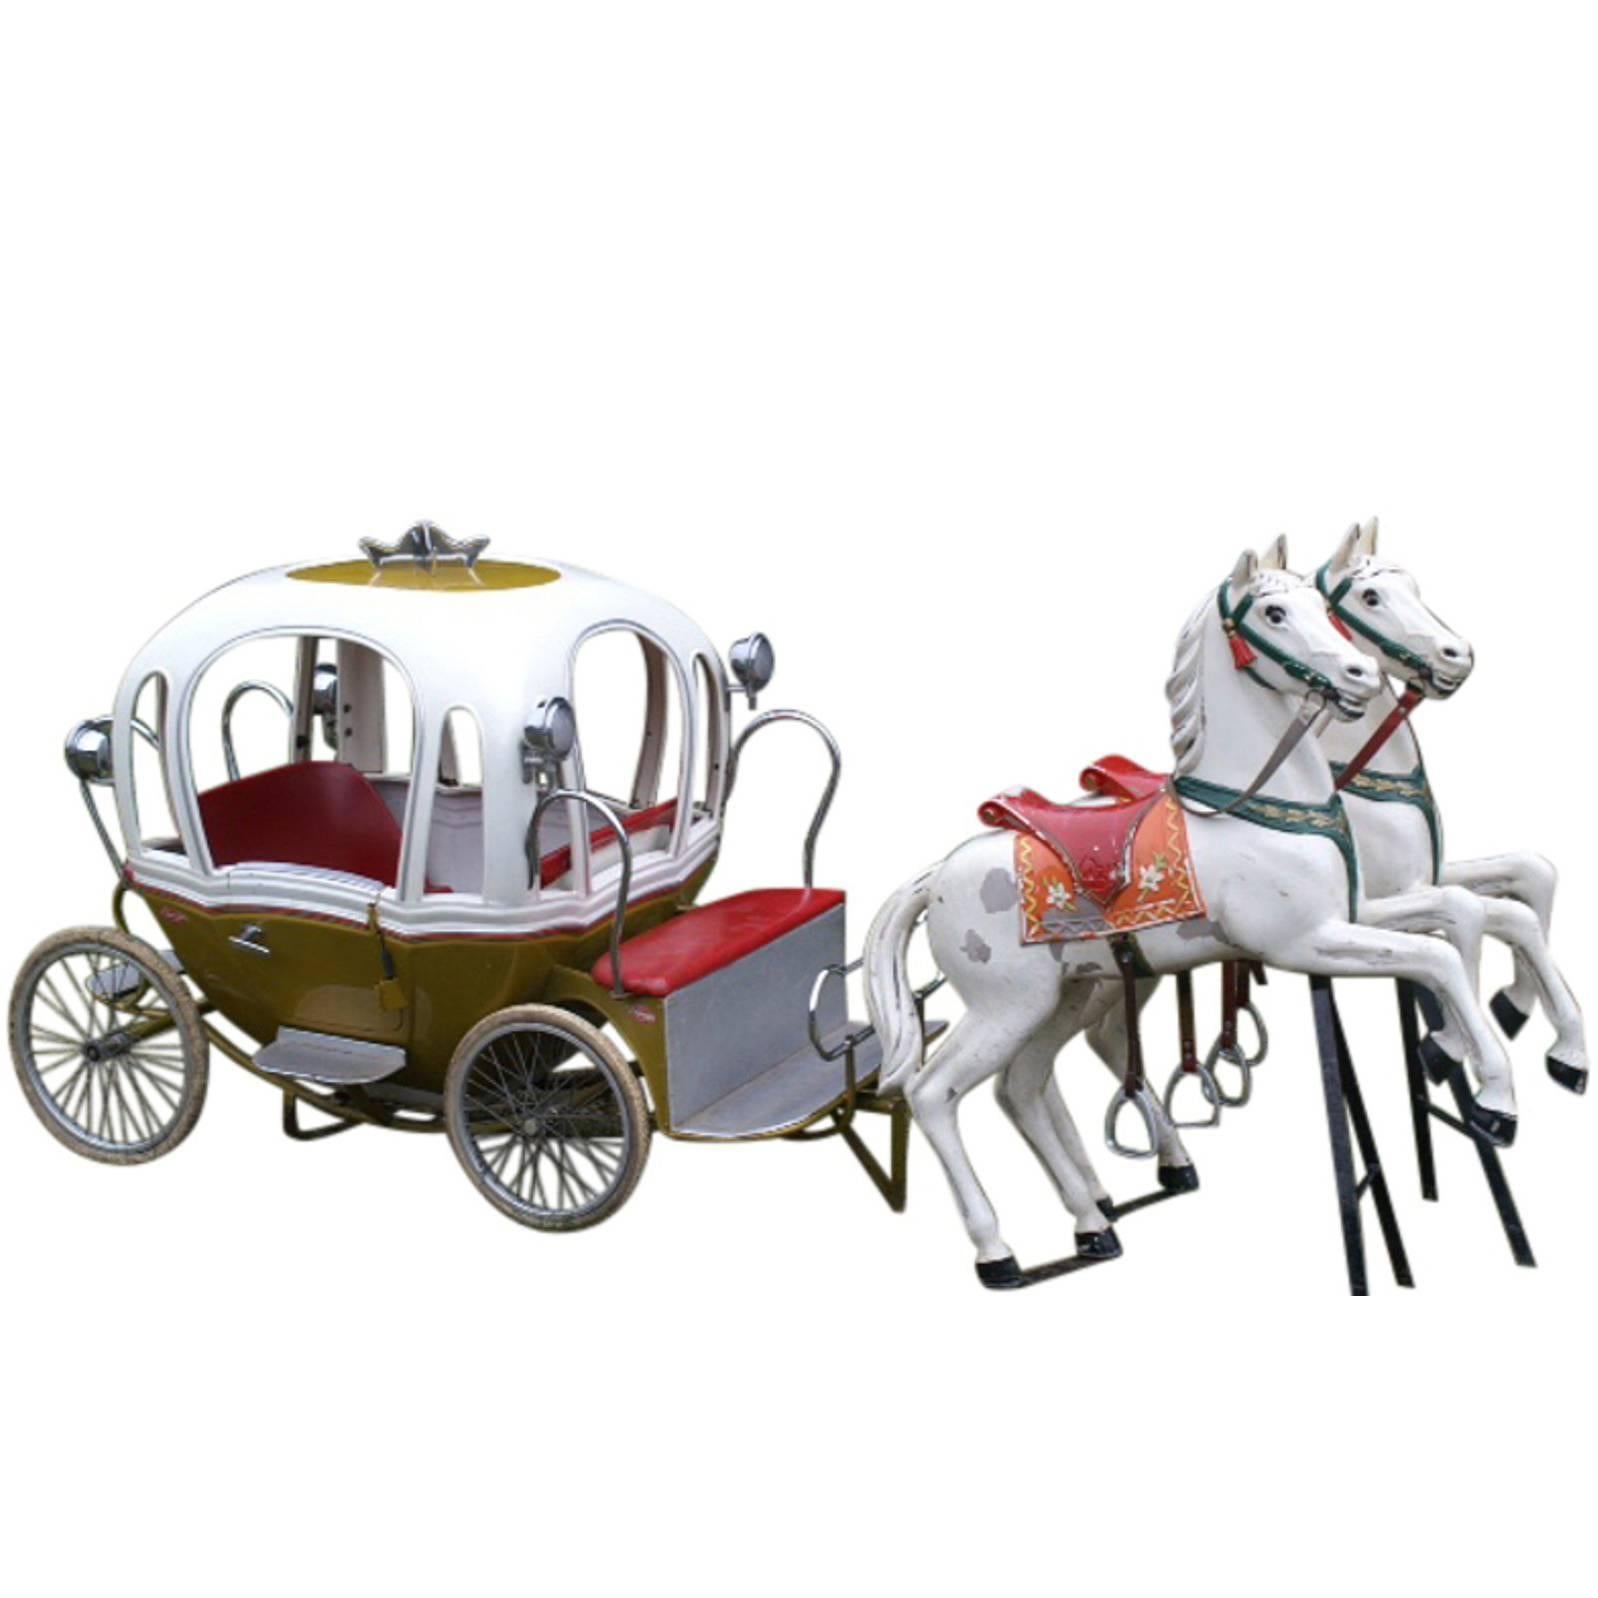 Metal Carousel Cinderella Carriage by L' Autopède Belgium with Two Horses, 1960s